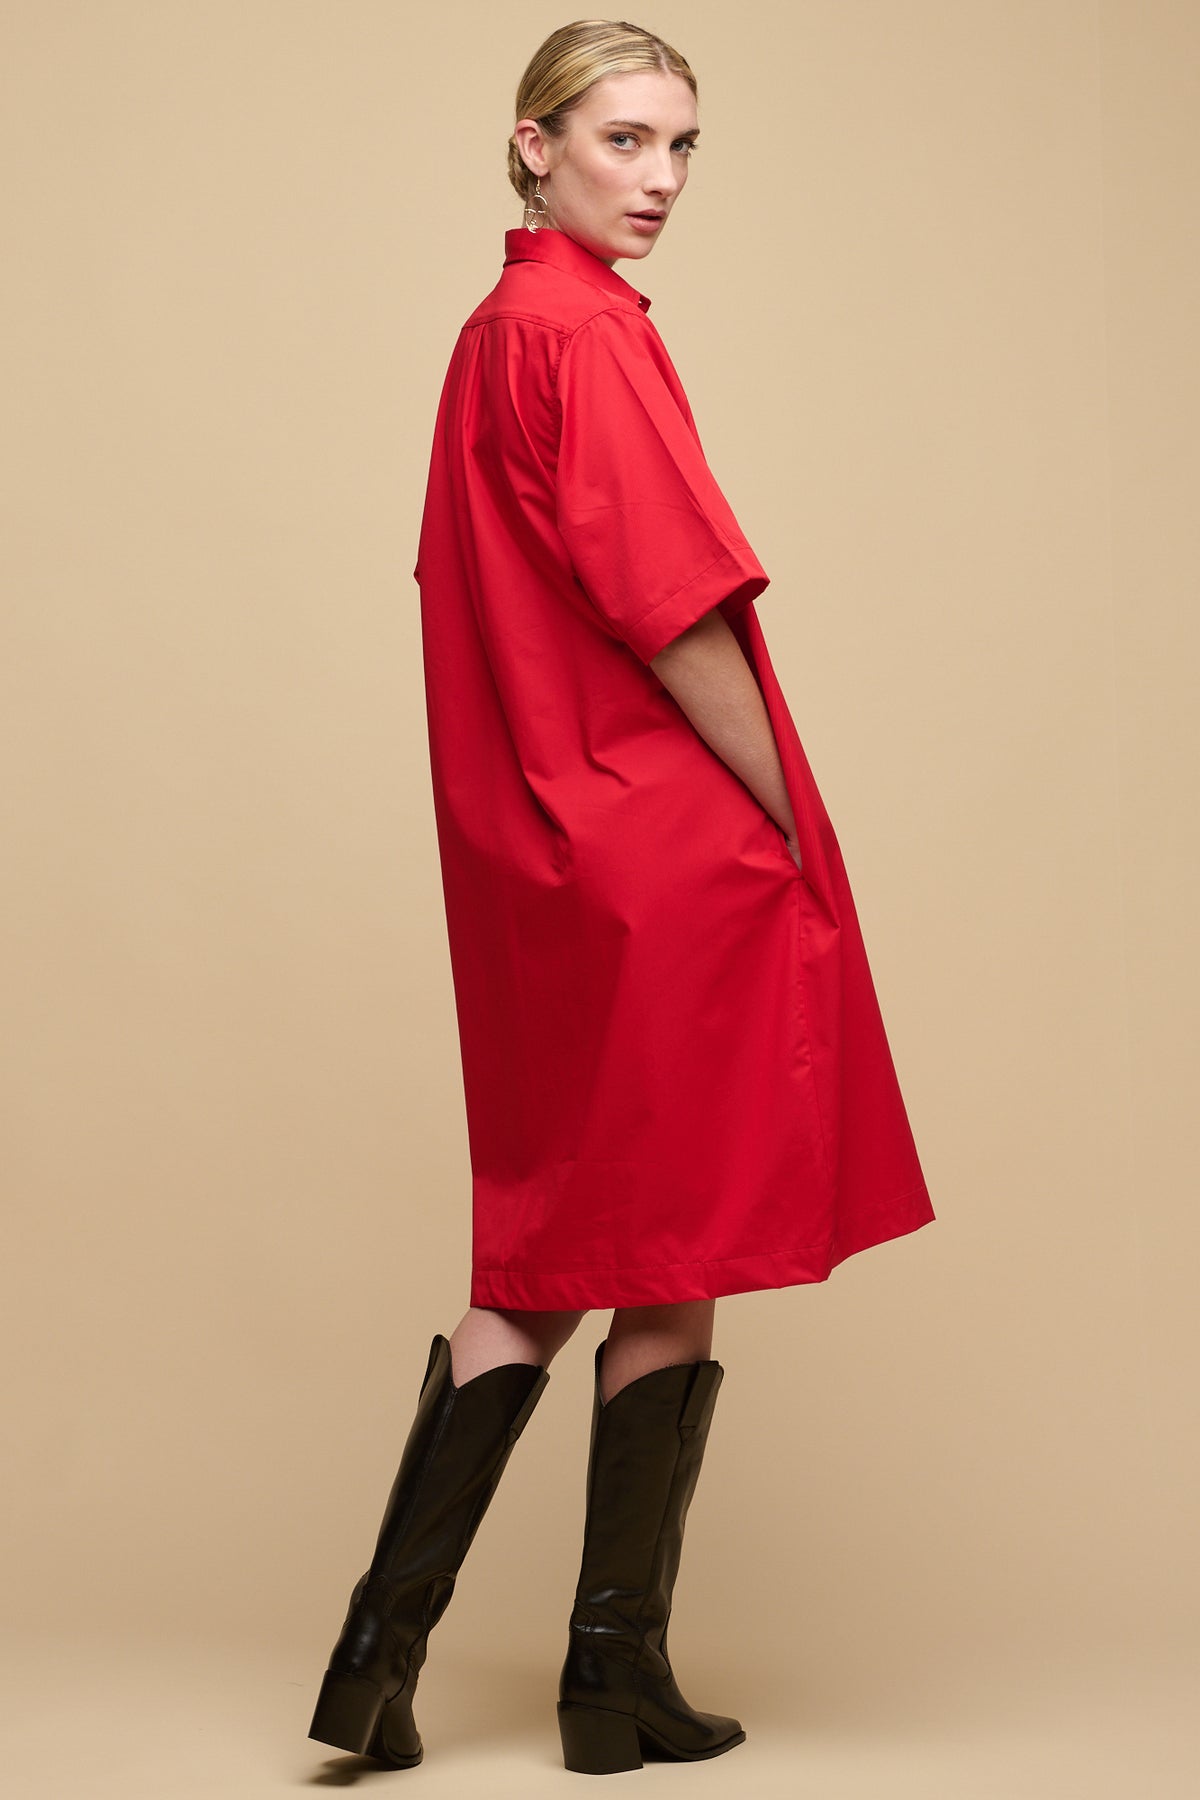 
            Back of female wearing unbelted cotton dress in red with hand in front pocket